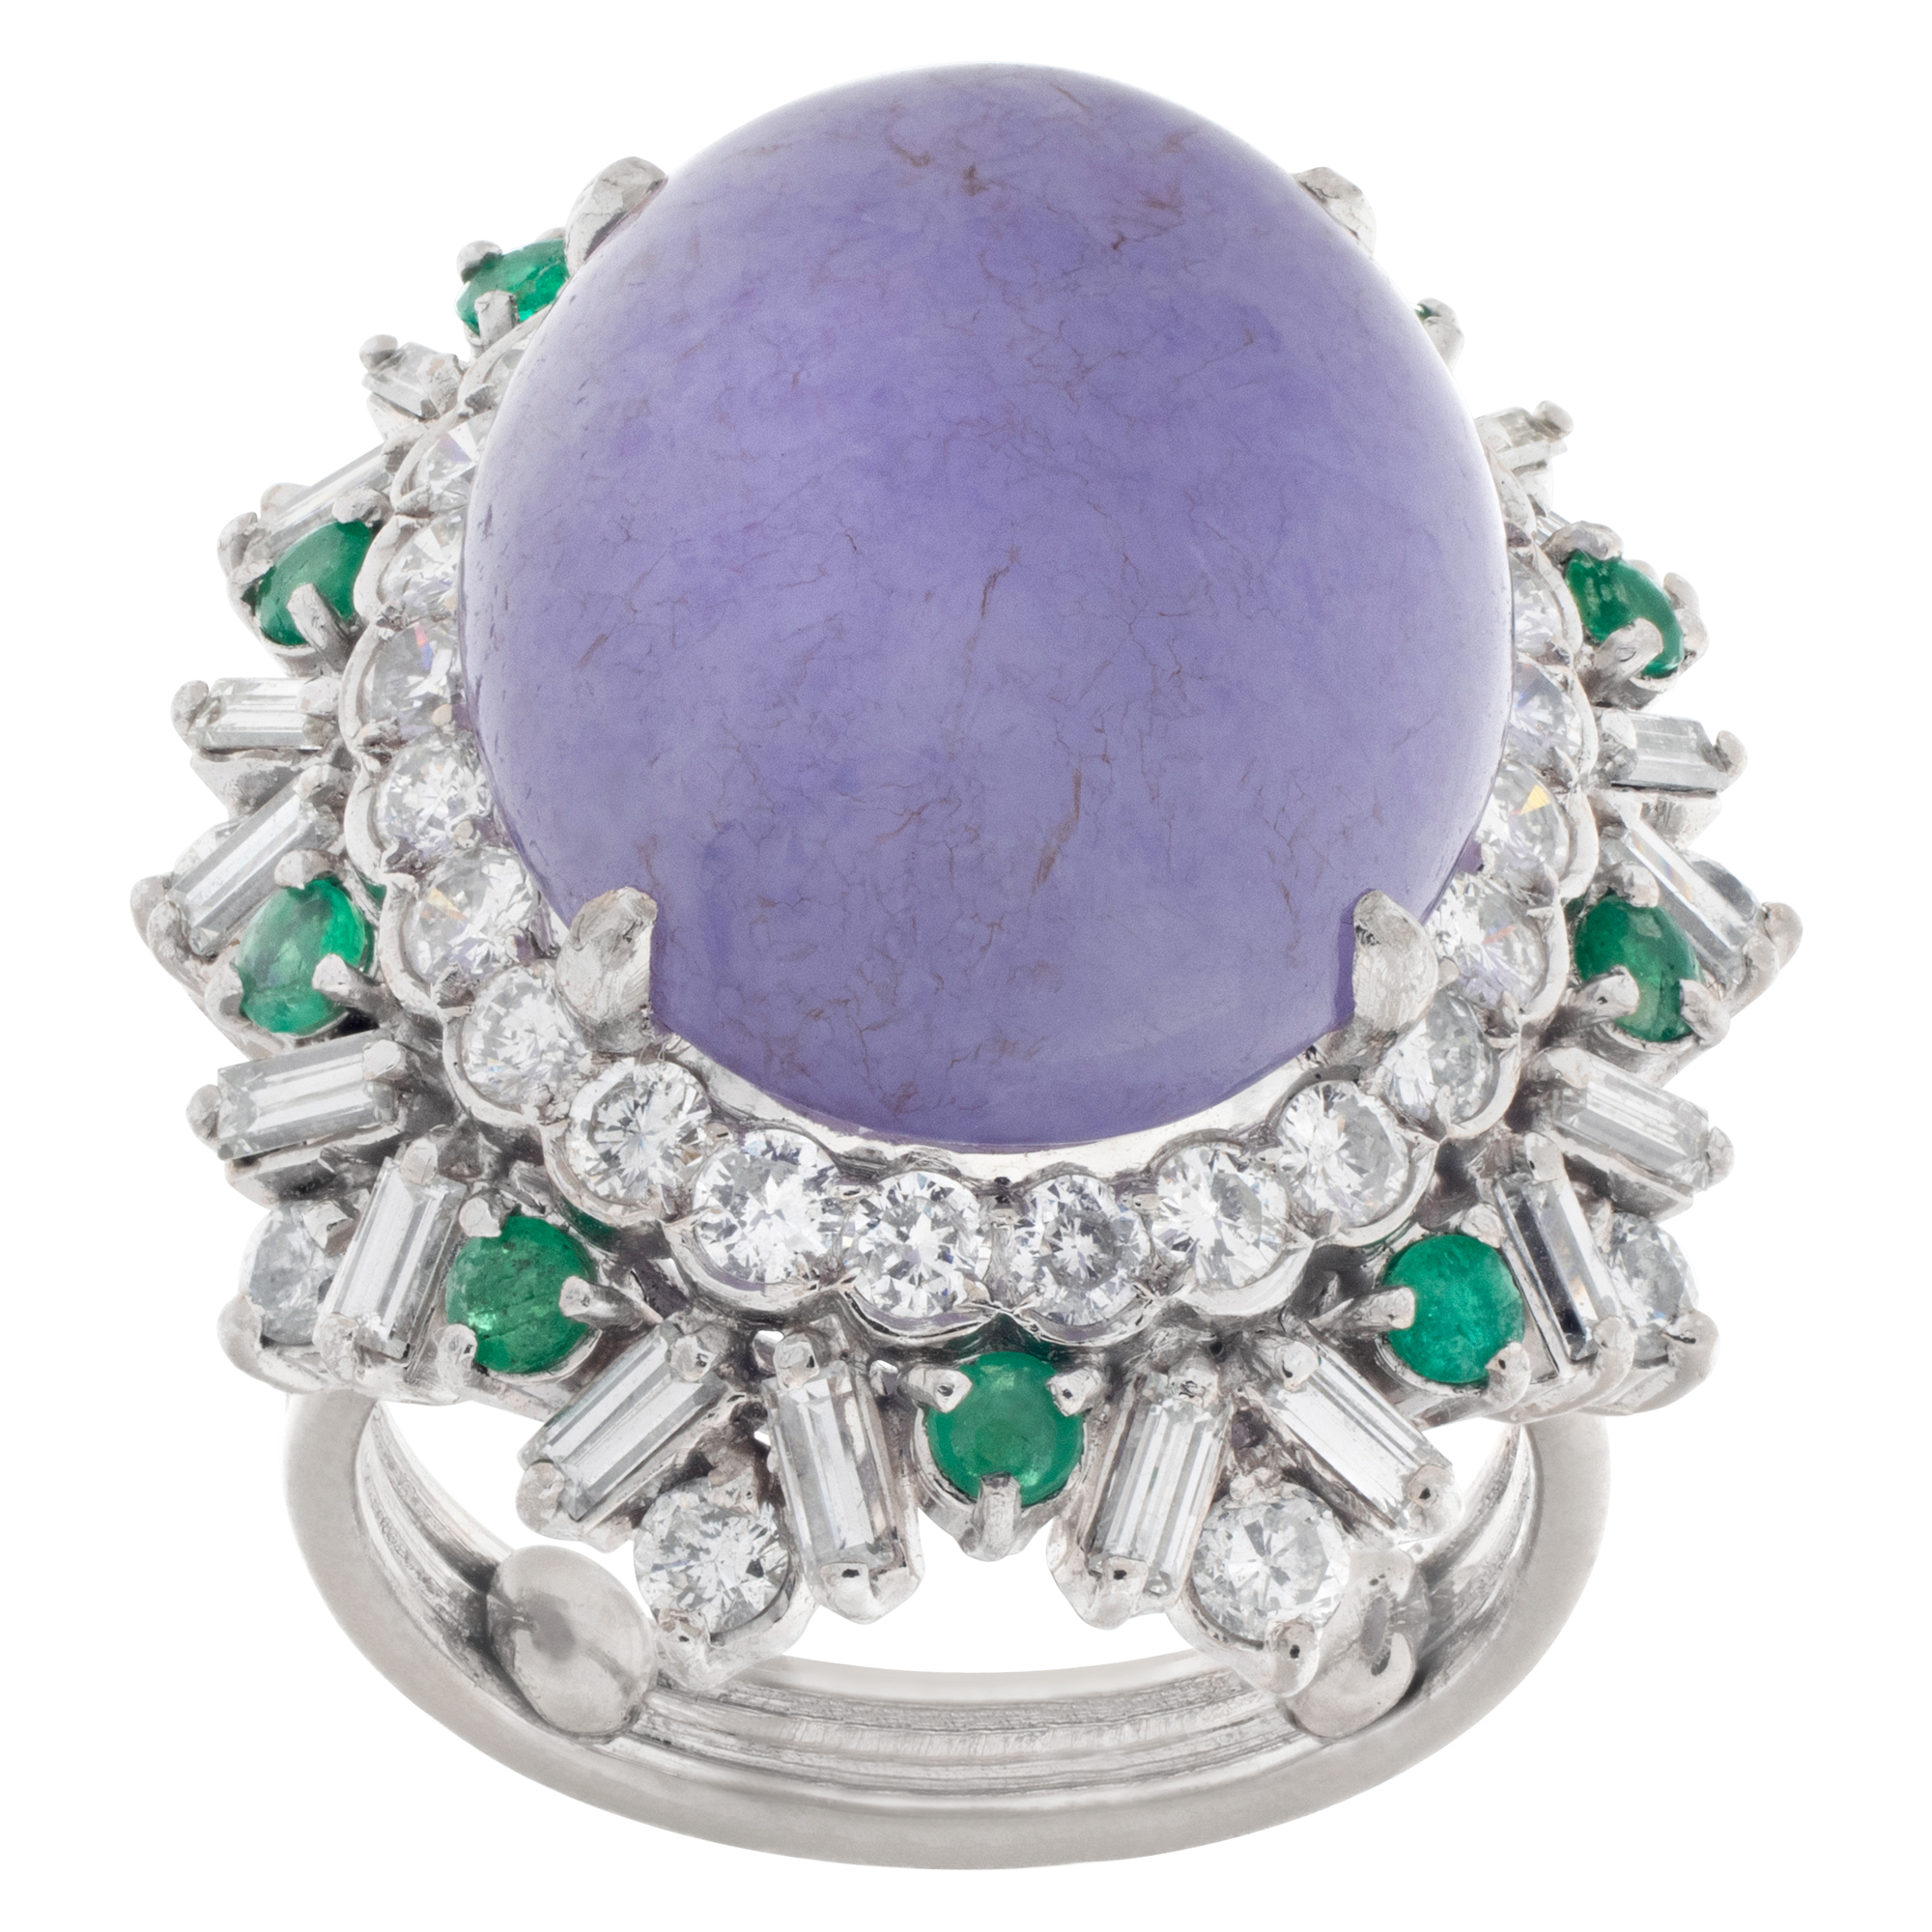 Quartz ring with diamonds and emeralds accents set in 18k white gold